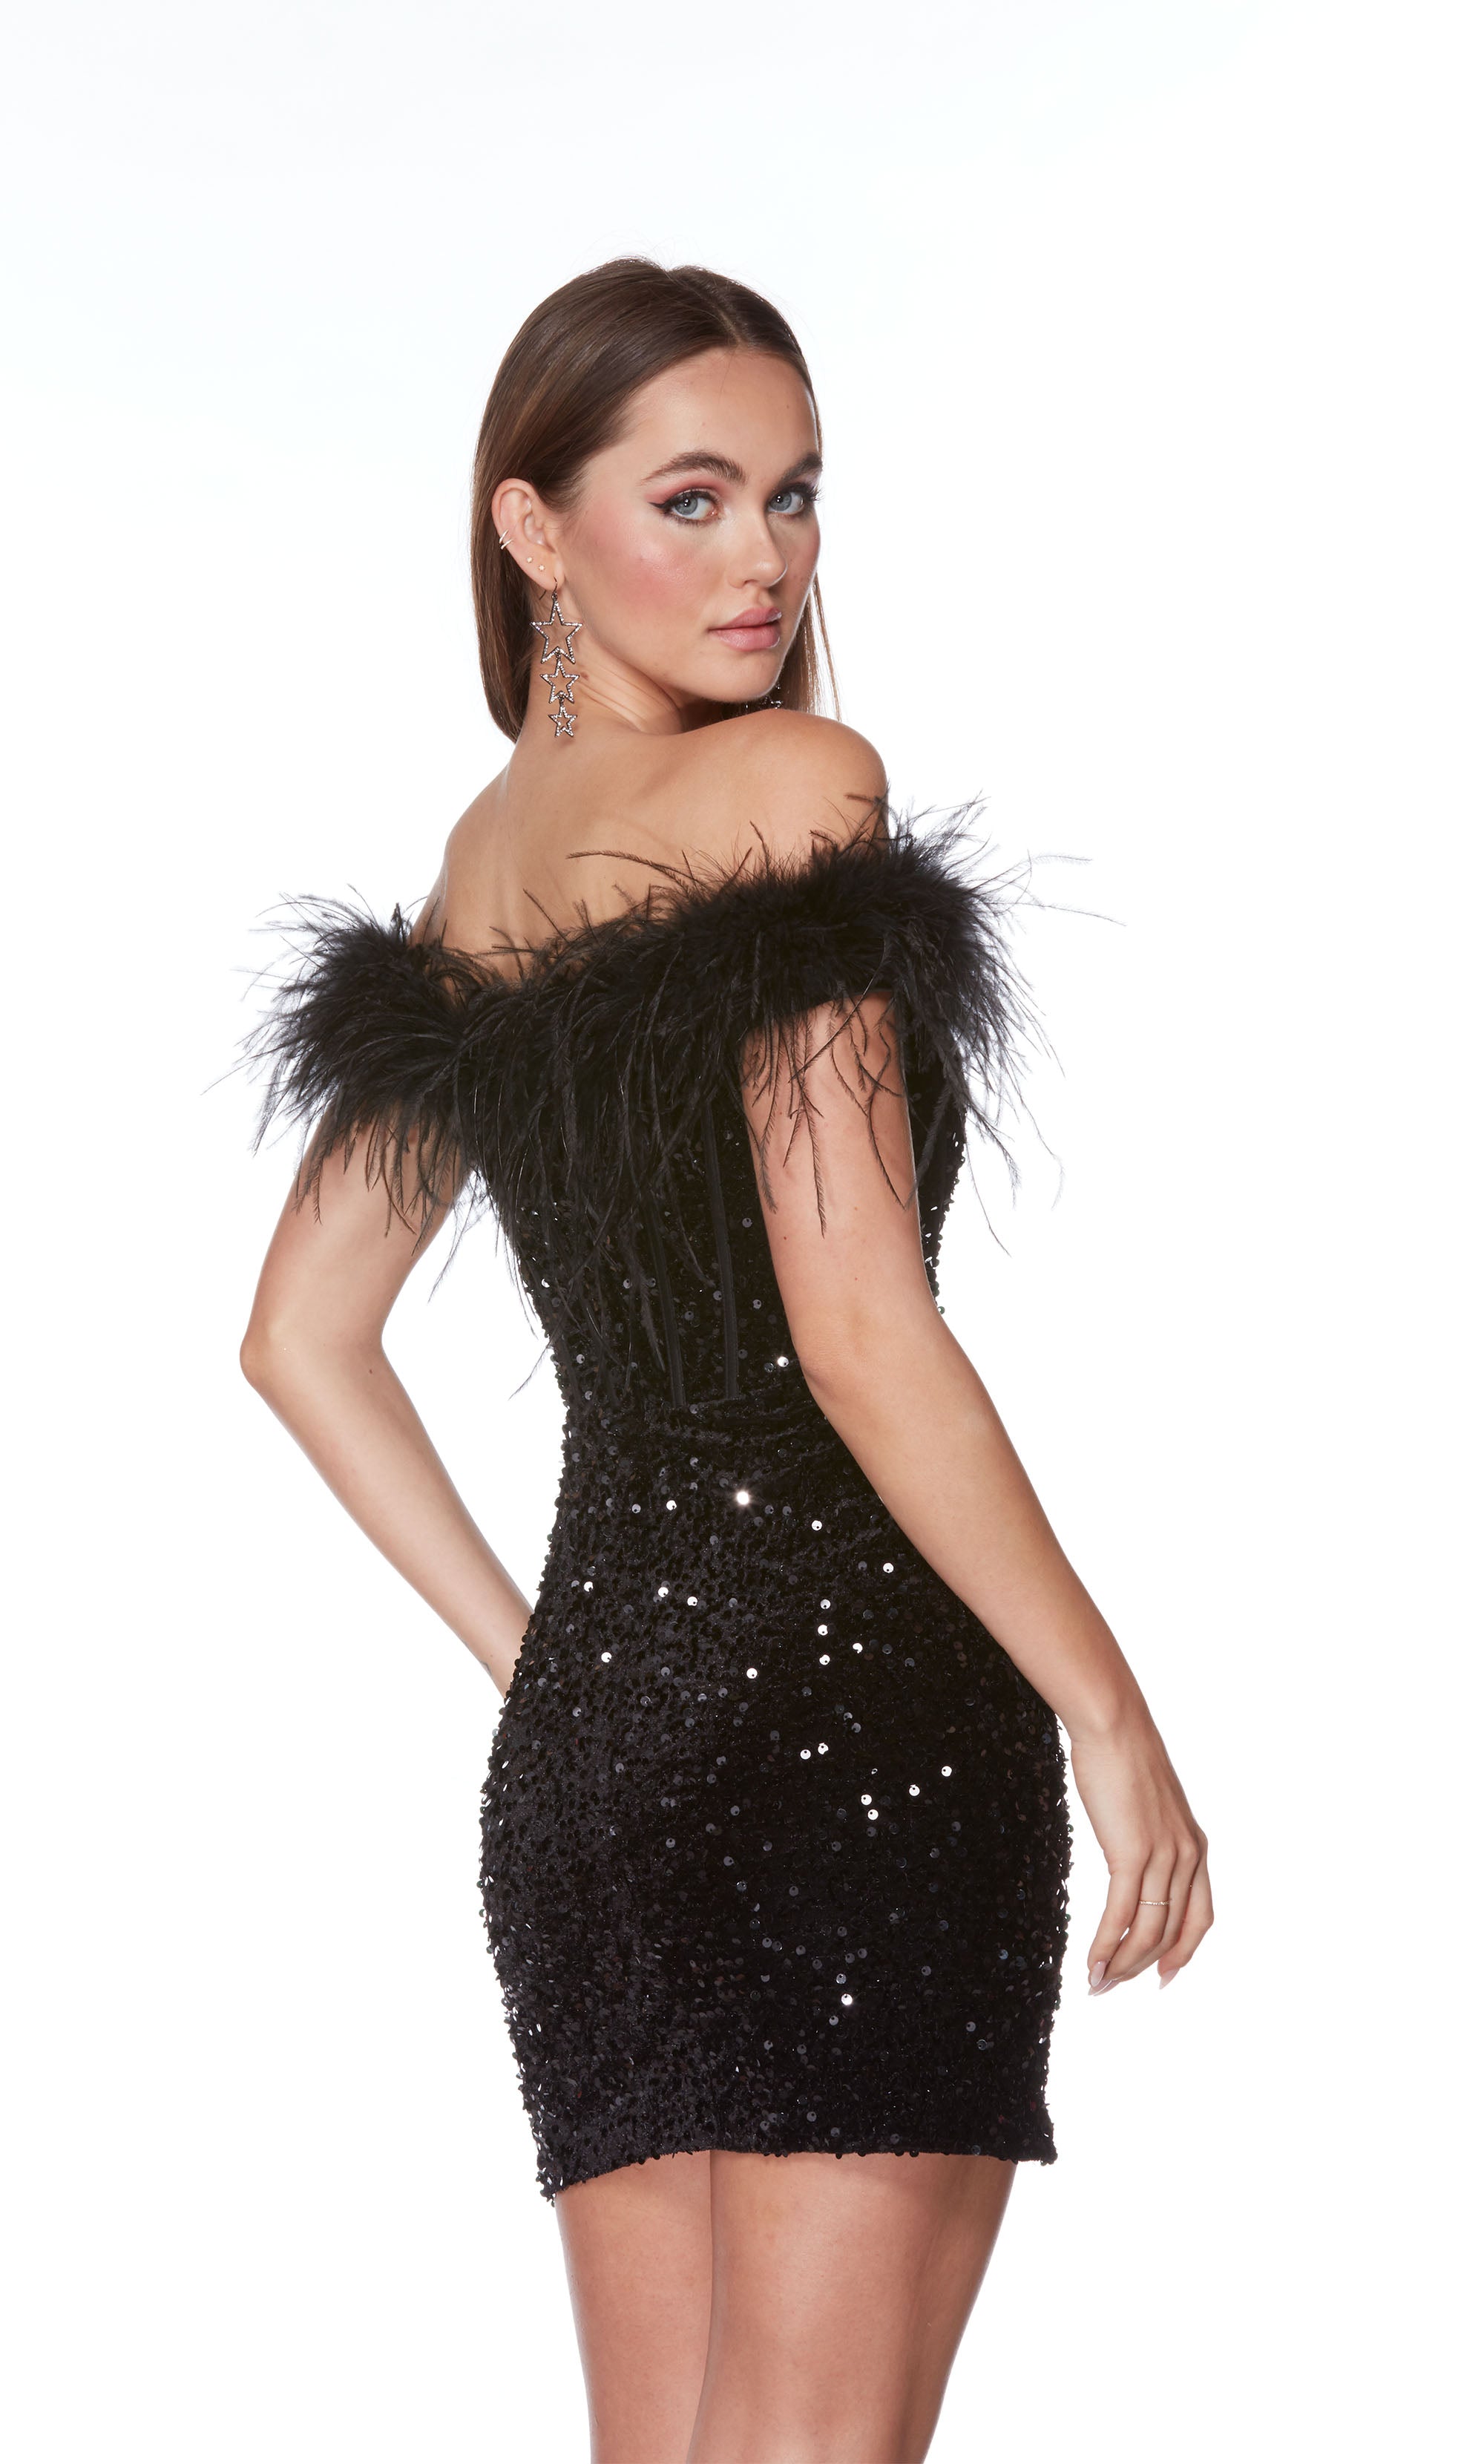 An off-the-shoulder, plunging neckline mini dress with a corset bodice with a zip-up side slit and feather trim in black plush sequins.